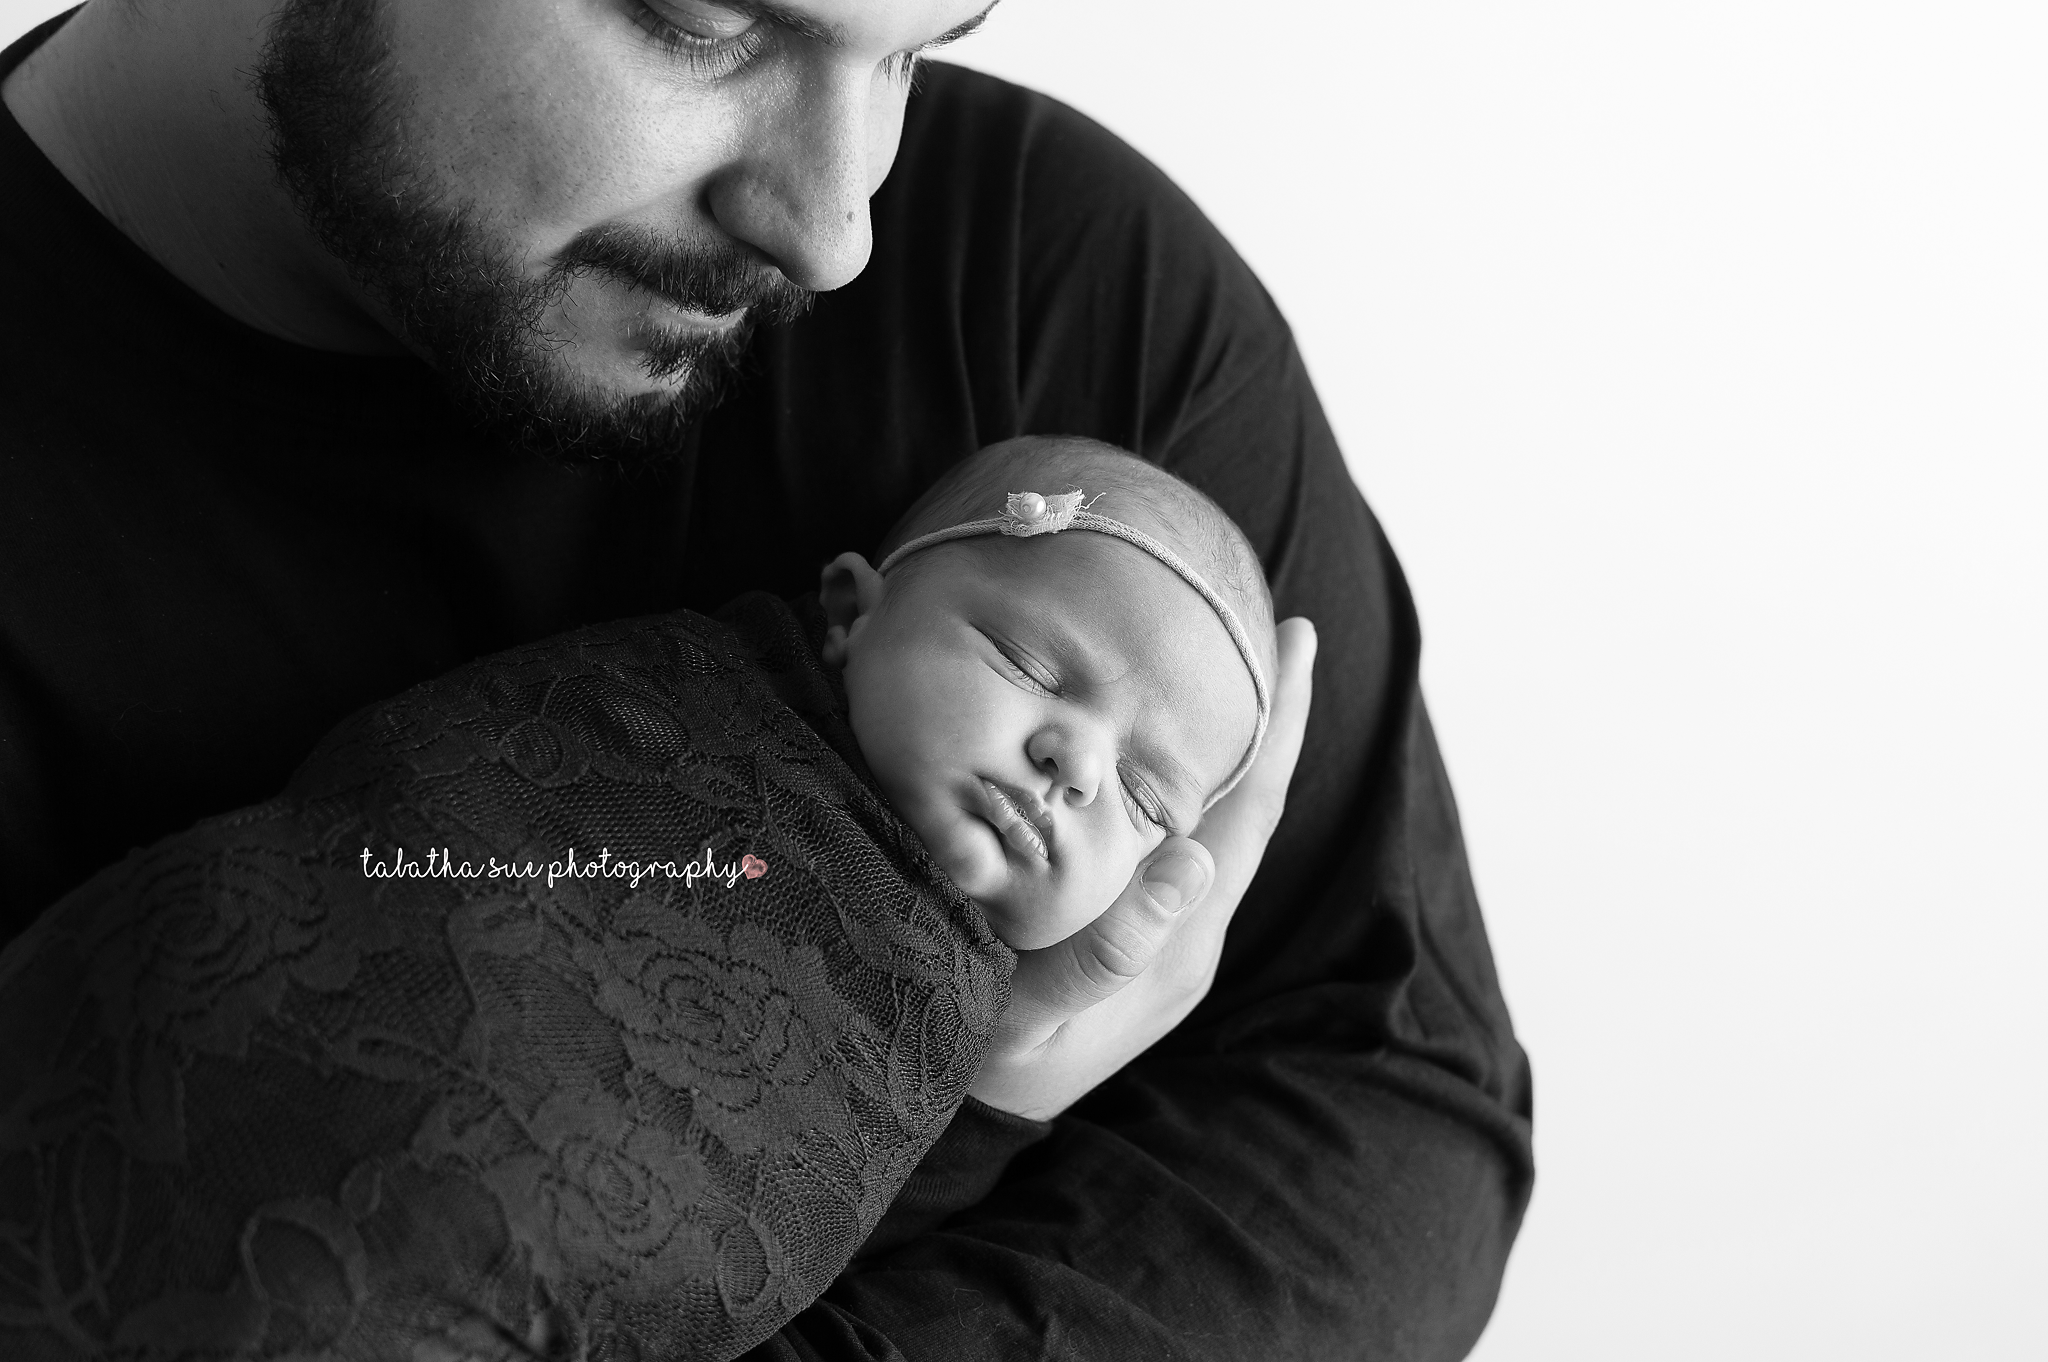 pictures-of-baby-with-dad-in-cleveland-ohio-best-newborn-photographer-near-cleveland-ohio-44130BW.png